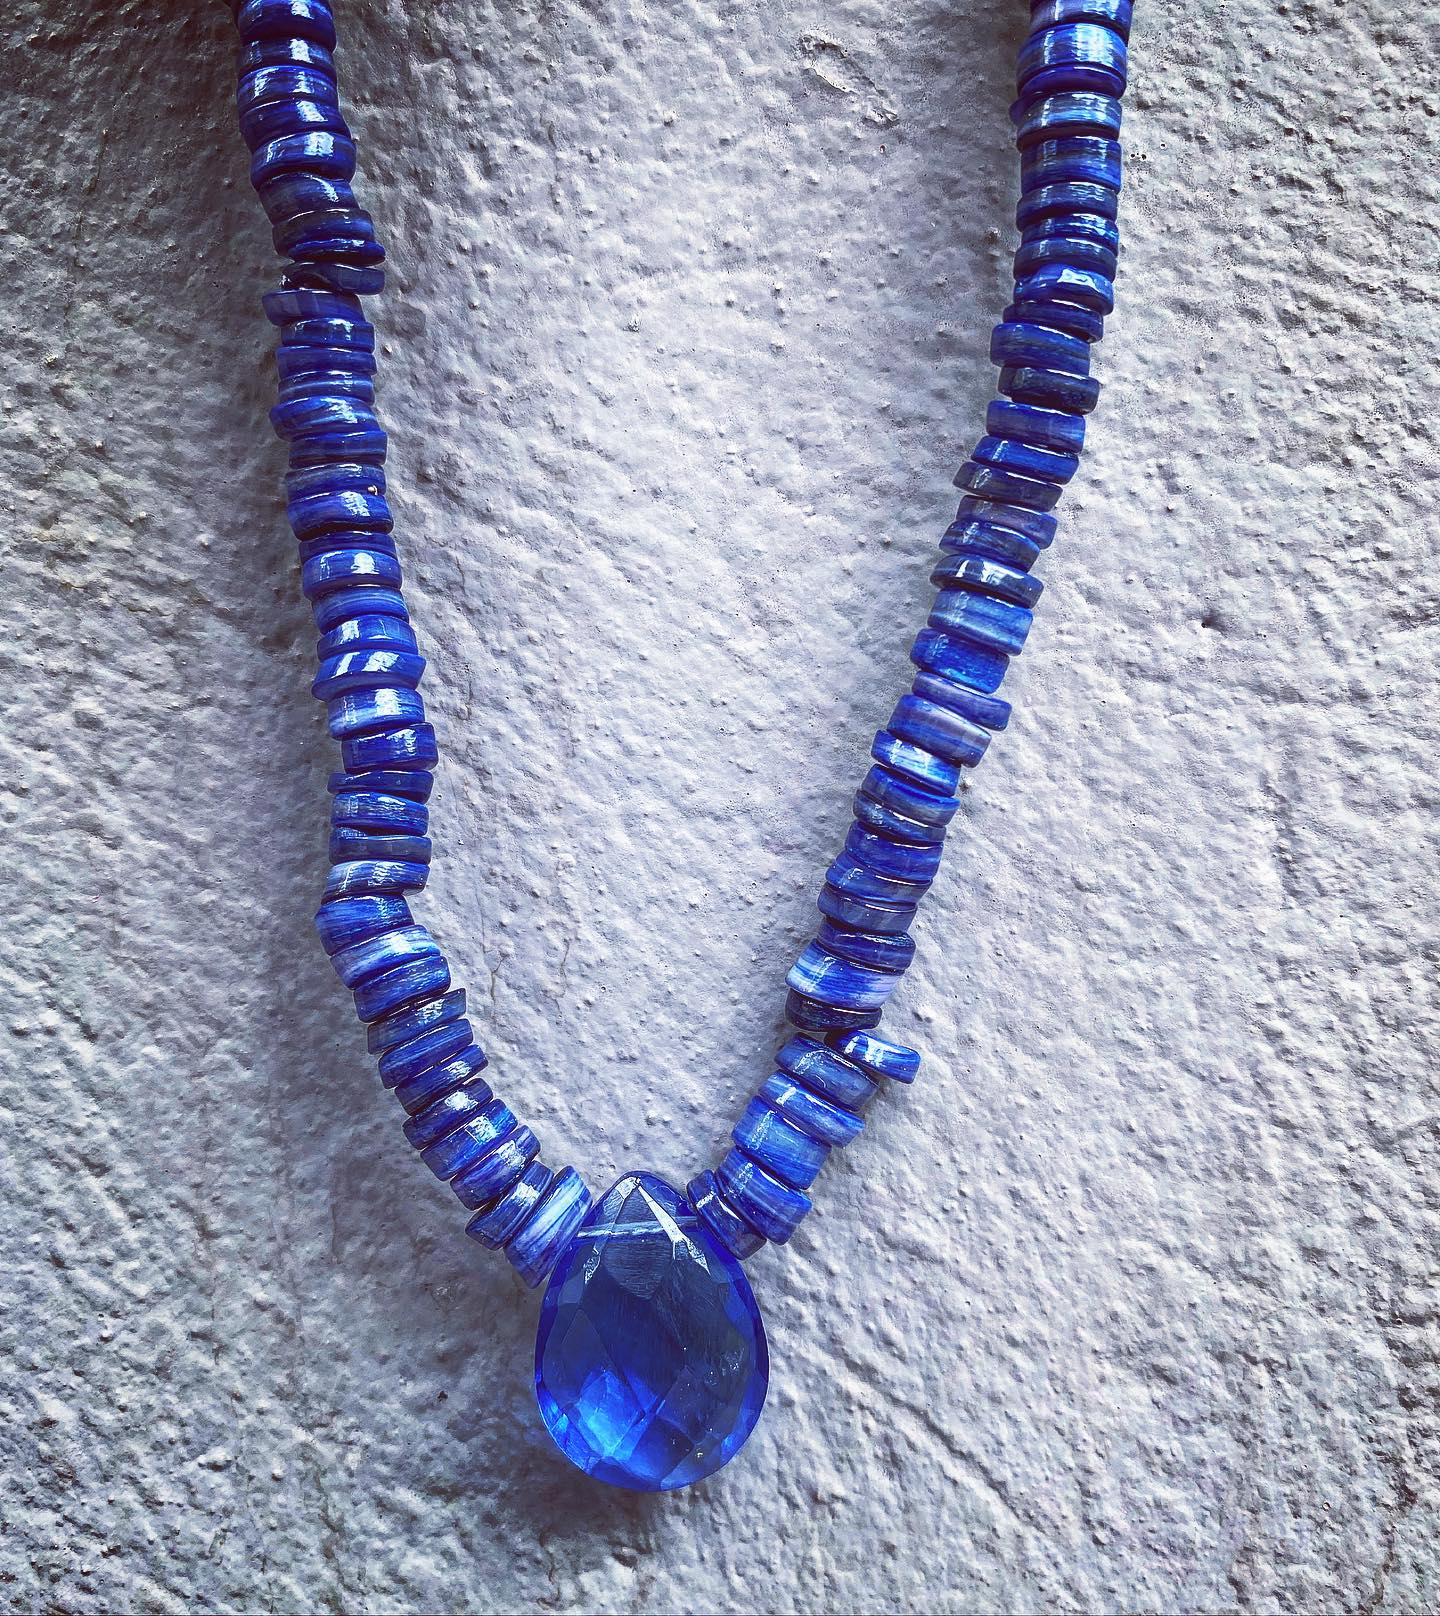 SScollection2022#mariatsaousi_com #mariatsaousi.com#collection#necklace by mariatsaousi.com#stayhome #staysafe #summervibes #summercollection #newcollection #necklaces #handmadejewelry #earrings#semiprecious stones#mariatsaousi_com #mariatsaousi_com #noema_kythnos